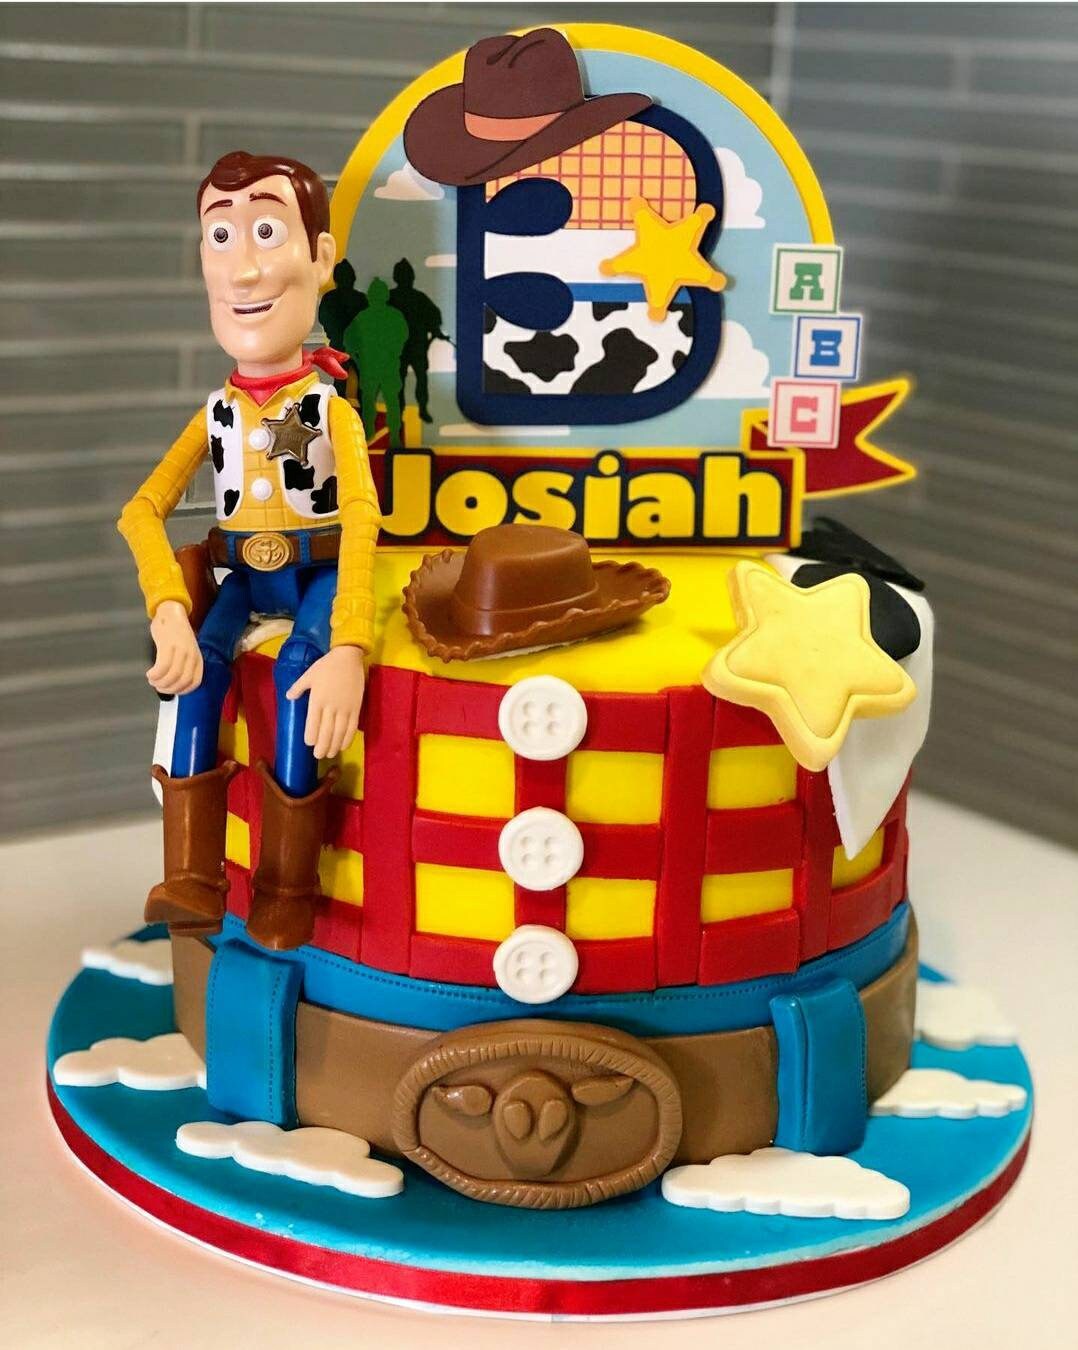 Amazon.com: 24 Edible Toy Story 4 Cupcake toppers - Toy story cake  decorations : Grocery & Gourmet Food